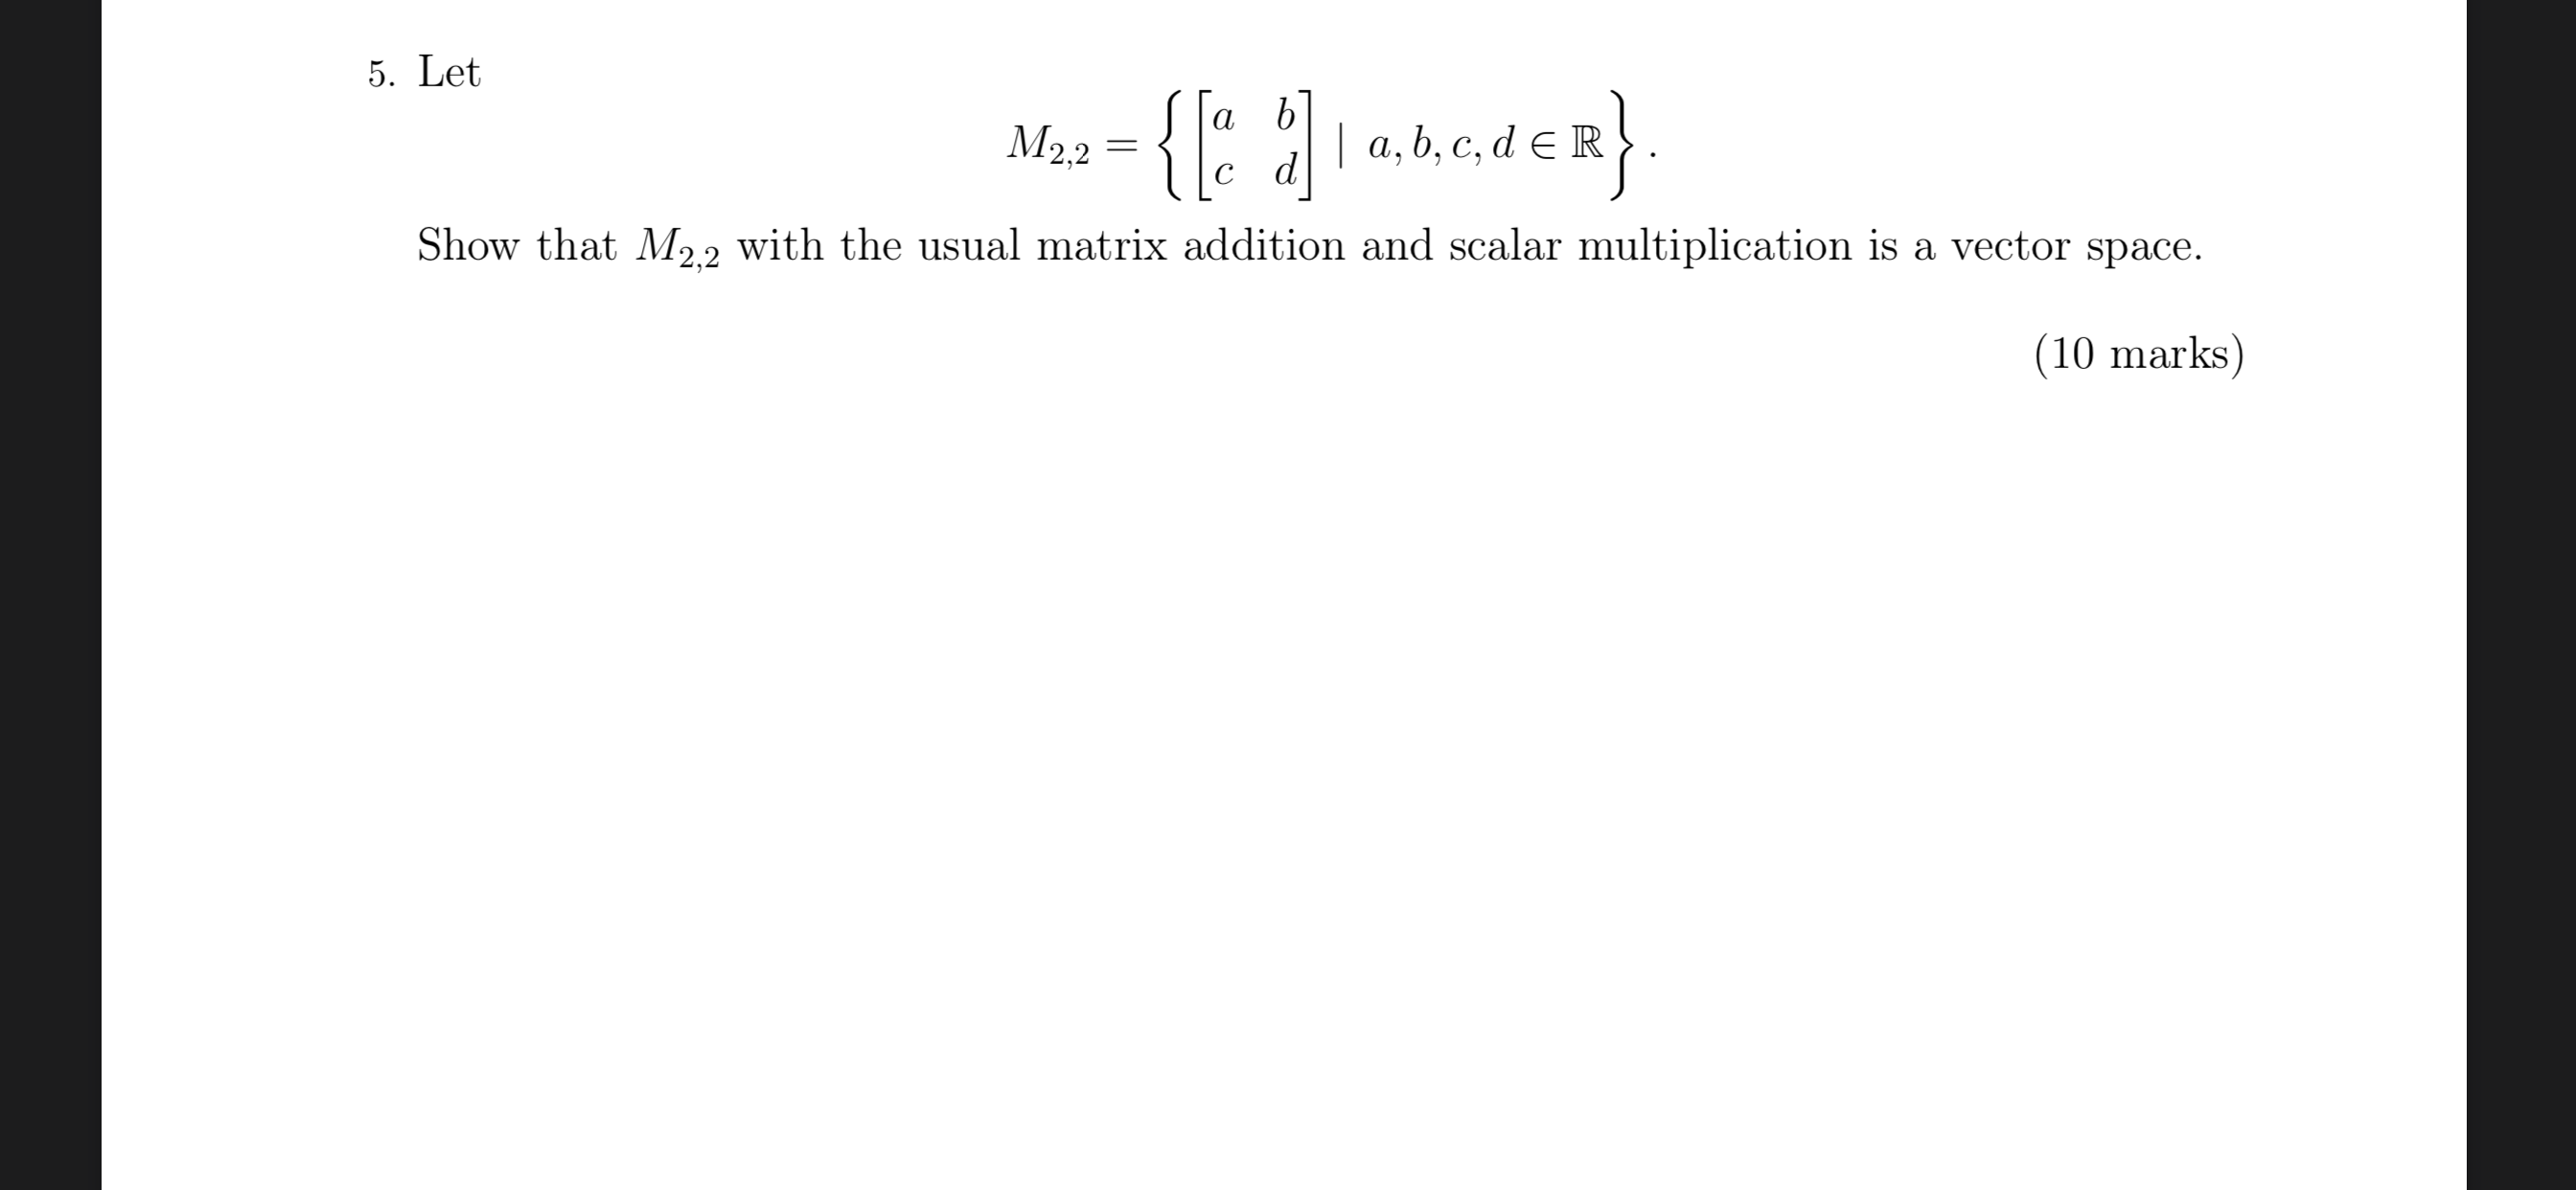 5. Let
a b
M22
| а, b, с, d € R
с d
Show that M22 with the usual matrix addition and scalar multiplication is a vector space.
